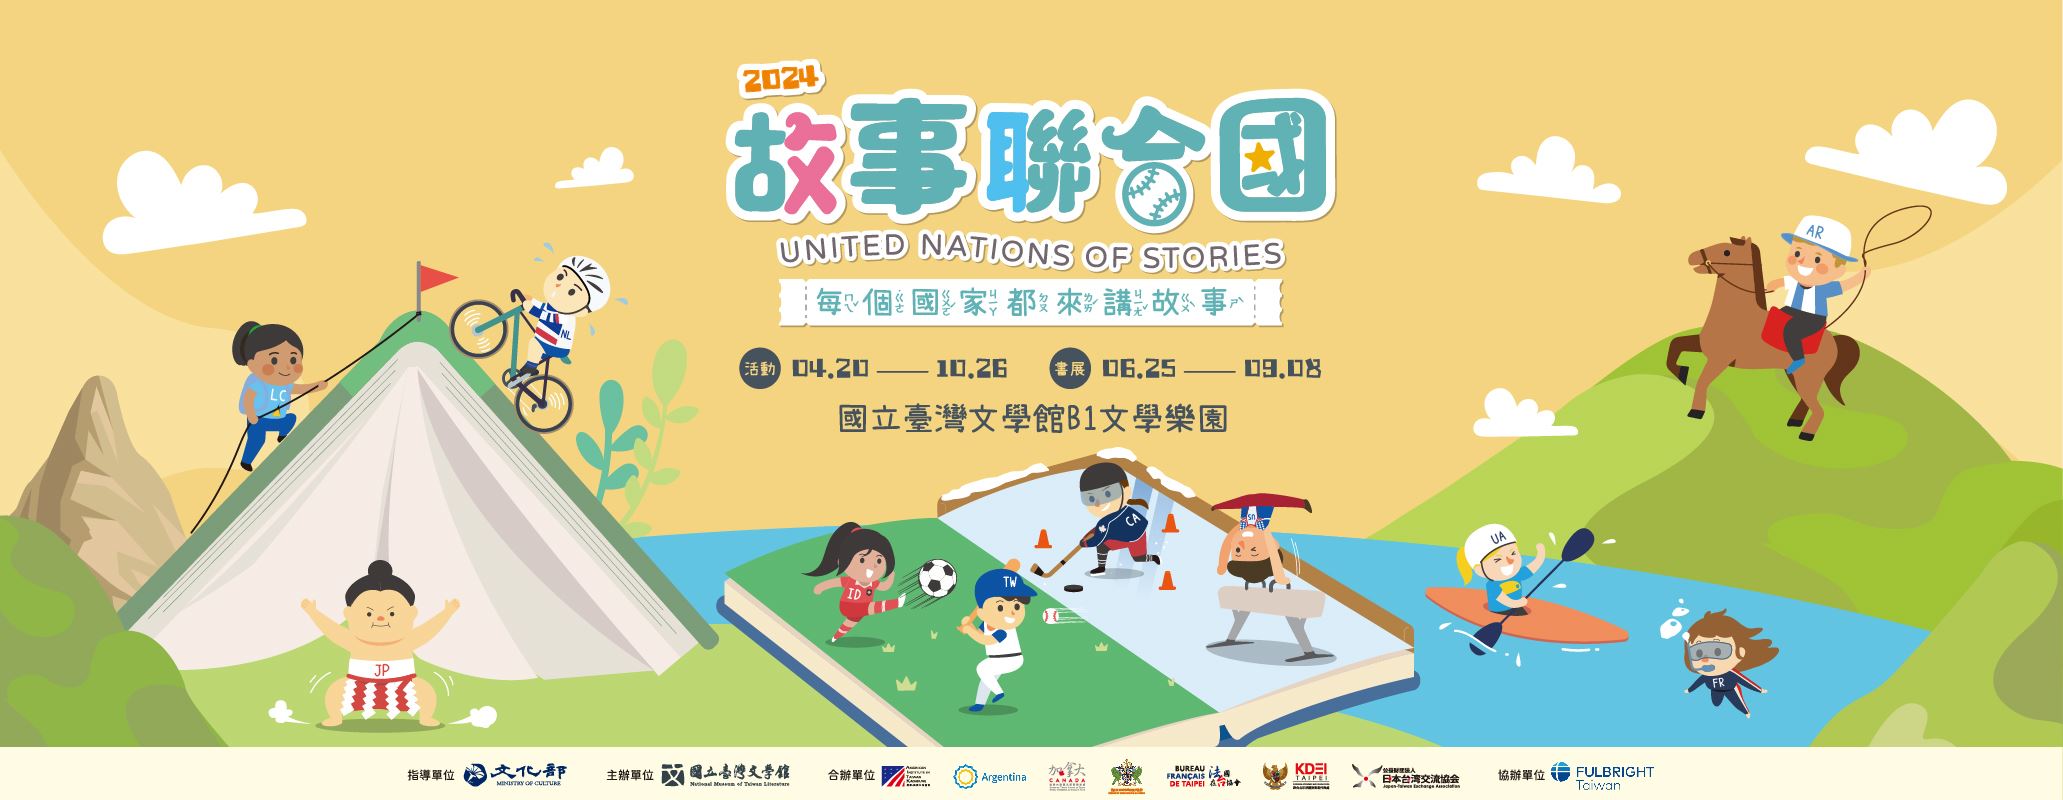 NMTL presents ‘United Nations of Stories,’ gathering stories from around the word